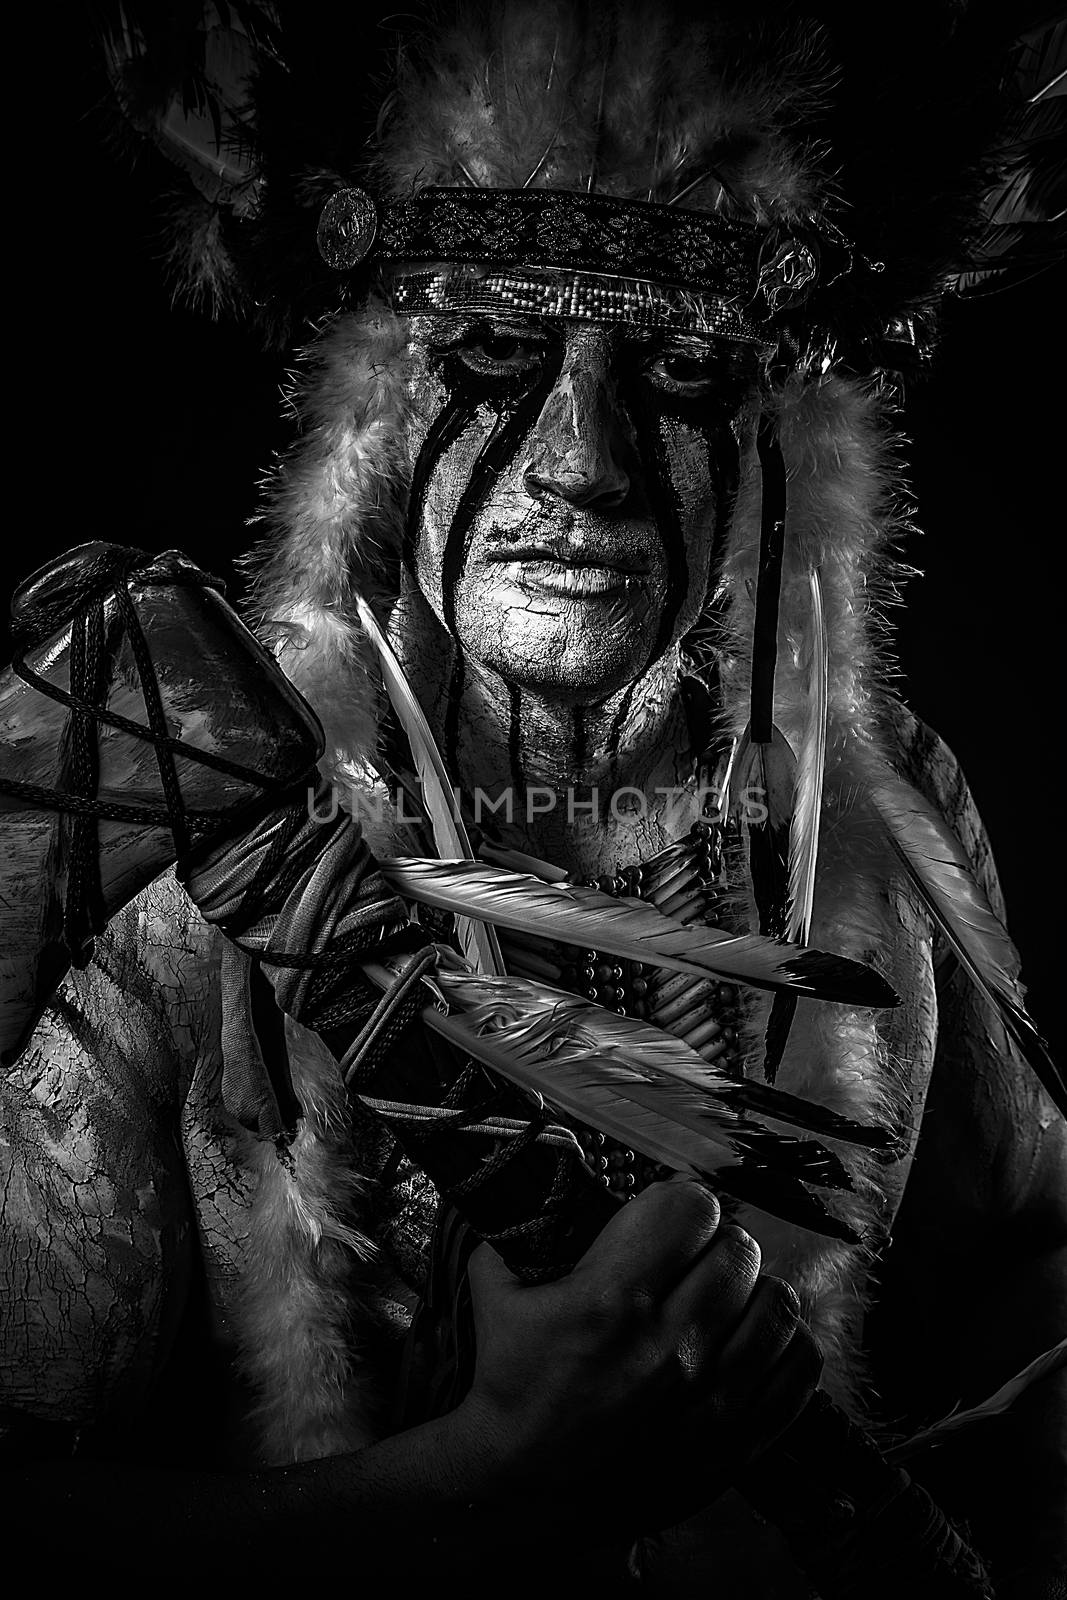 American Indian chief with big feather headdress, warrior by FernandoCortes